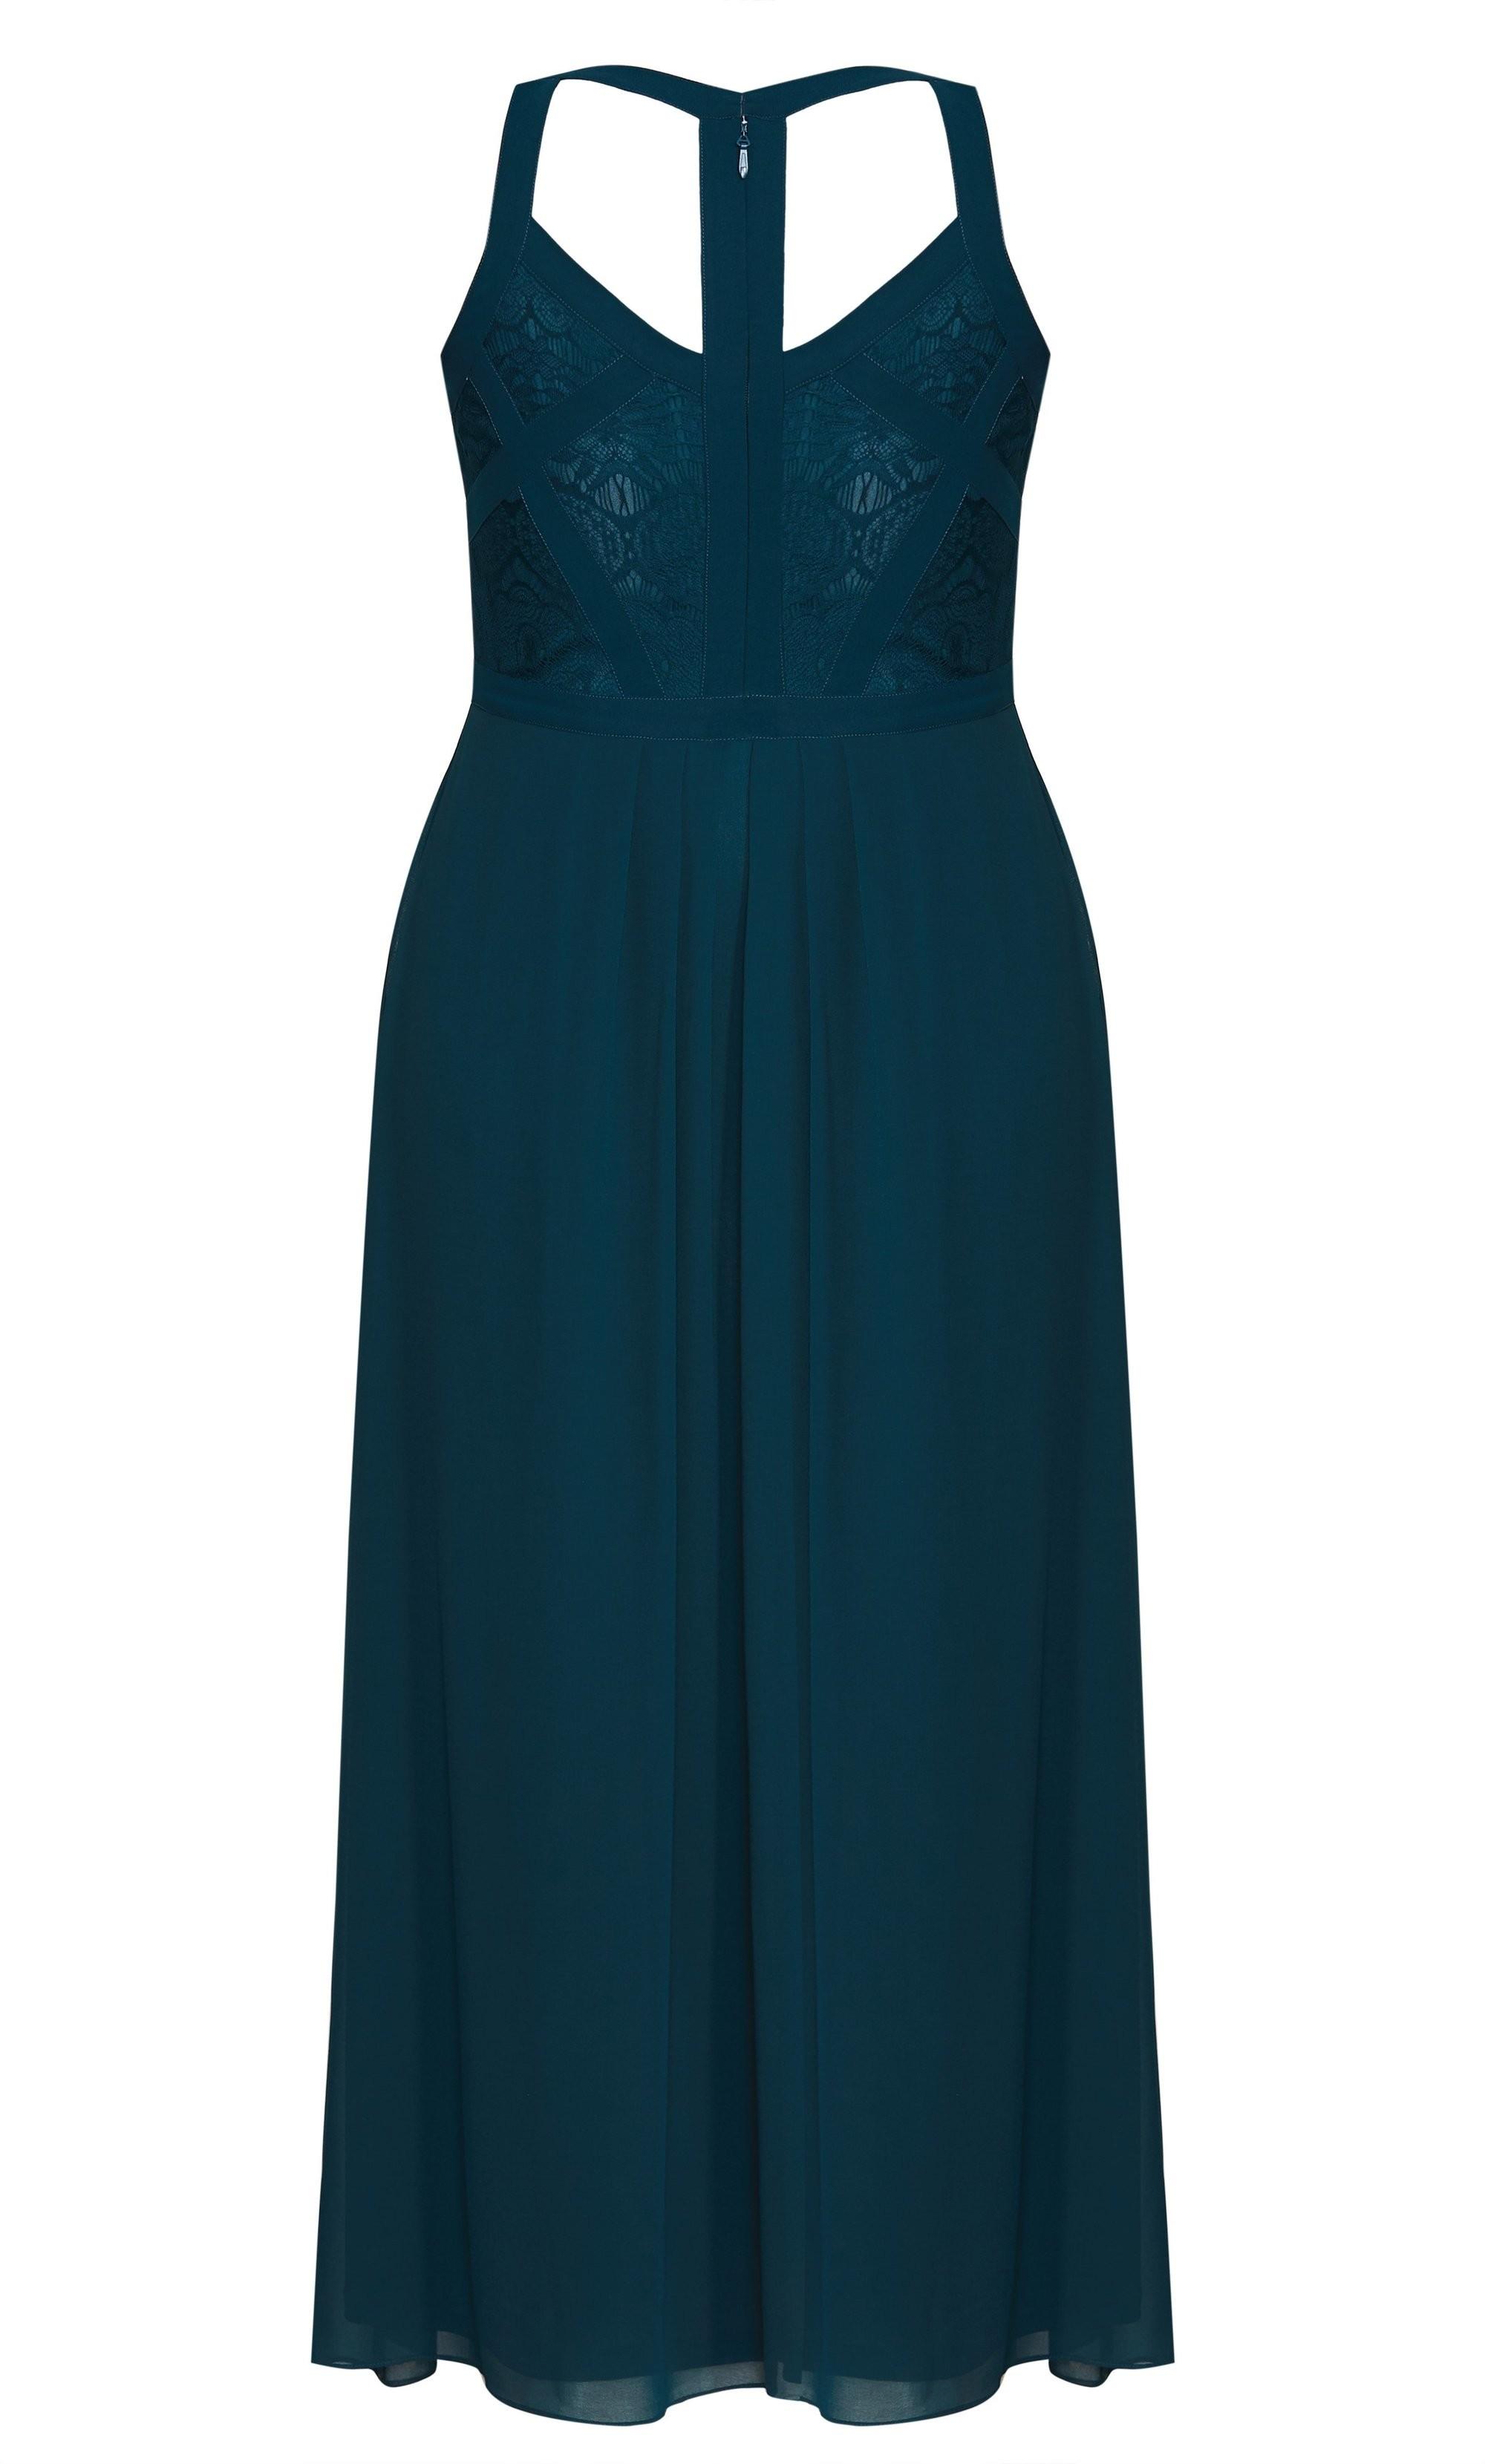 City Chic Lace Panelled Bodice Maxi Dress in Emerald (Green) - Lyst